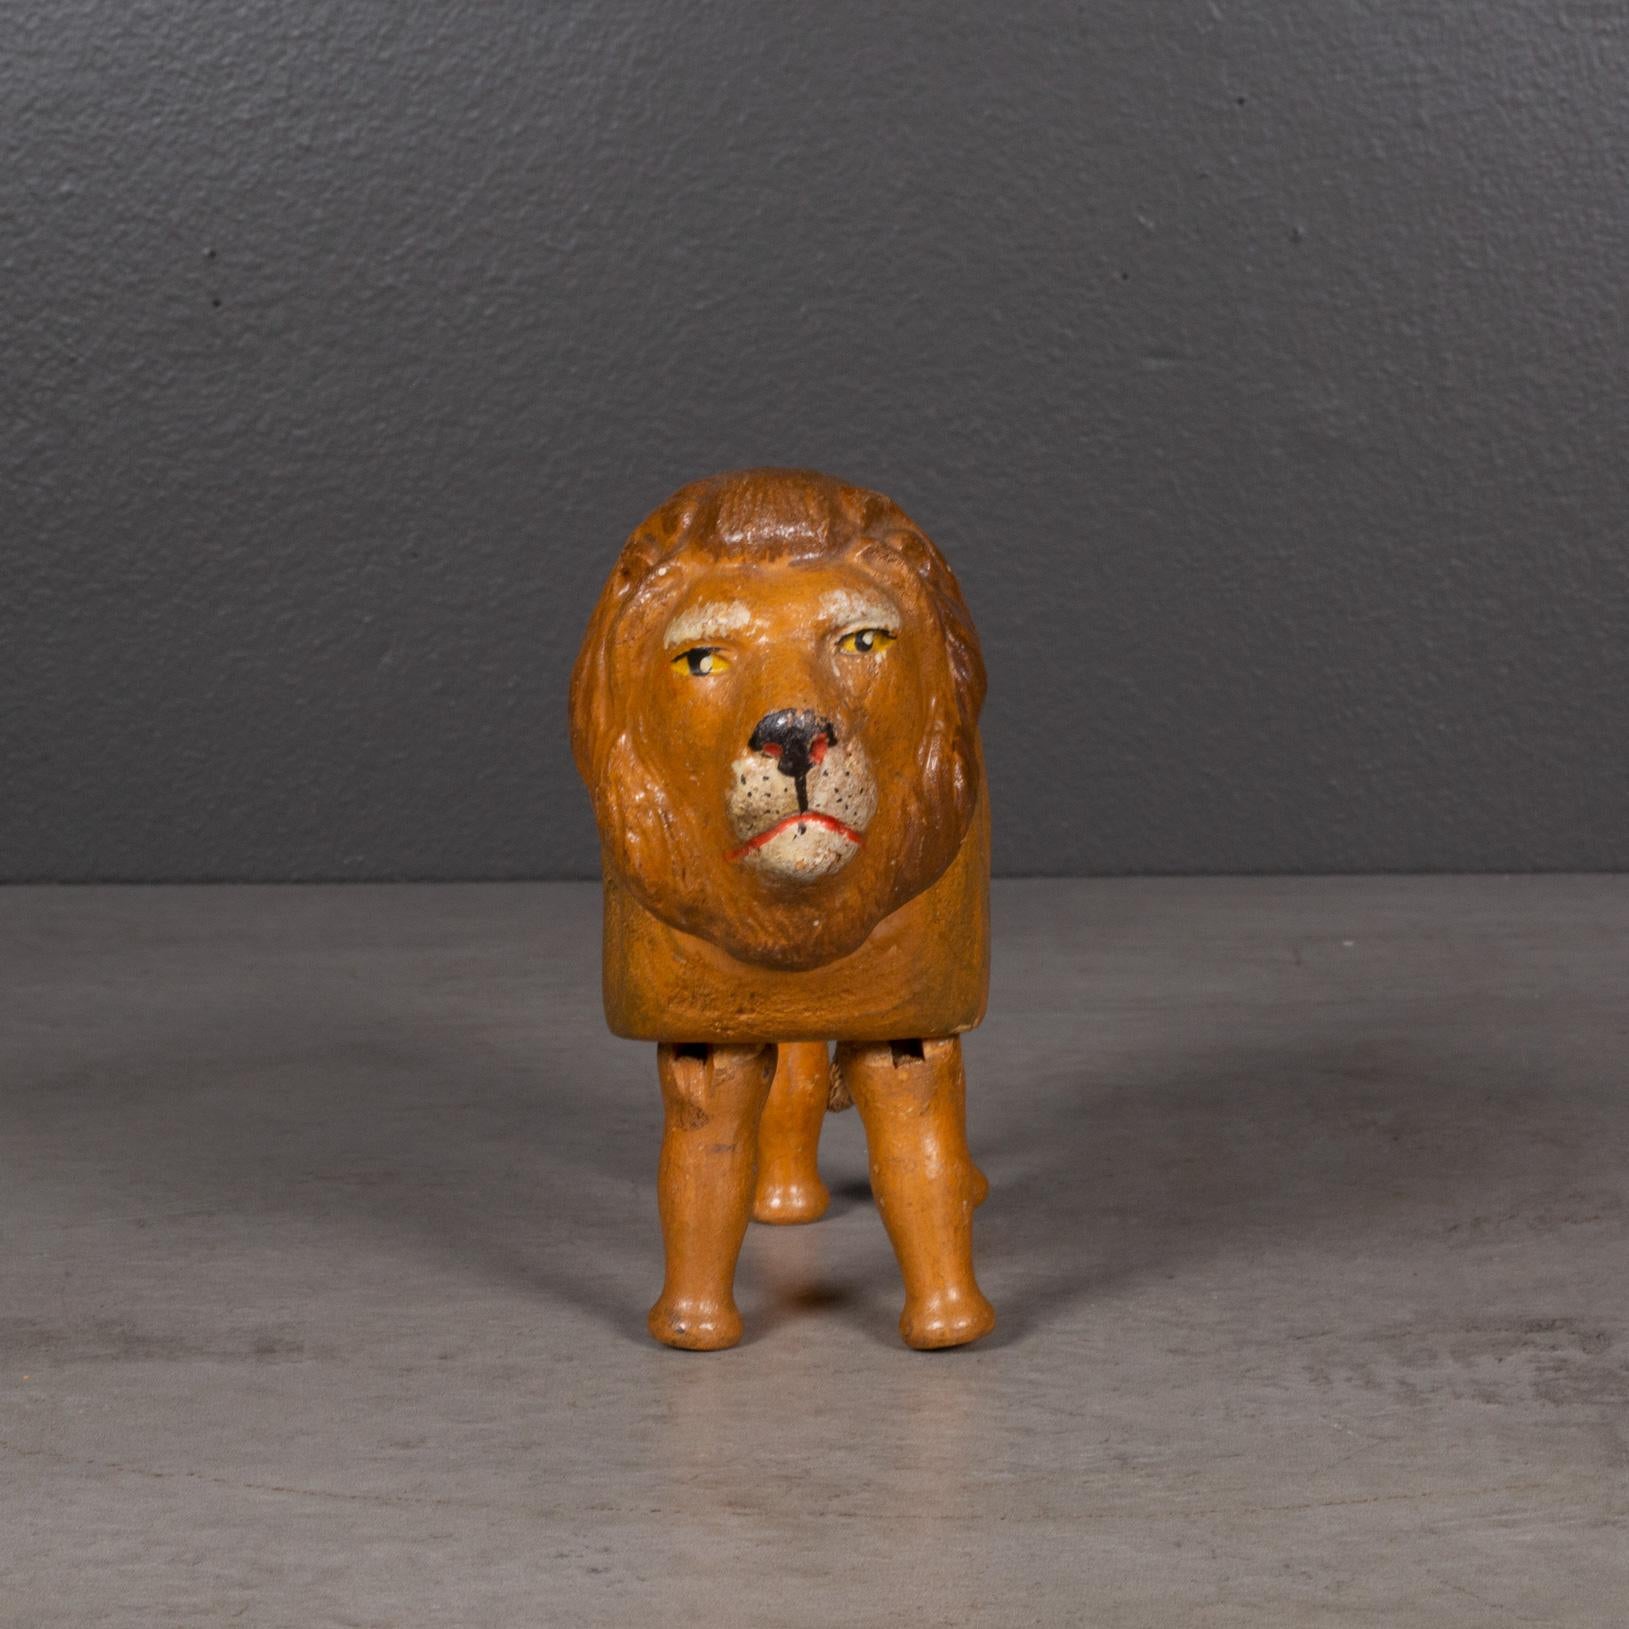 ABOUT

Jointed wooden lion manufactured in the 1900s by the Schoenhut Piano Company as part of the 